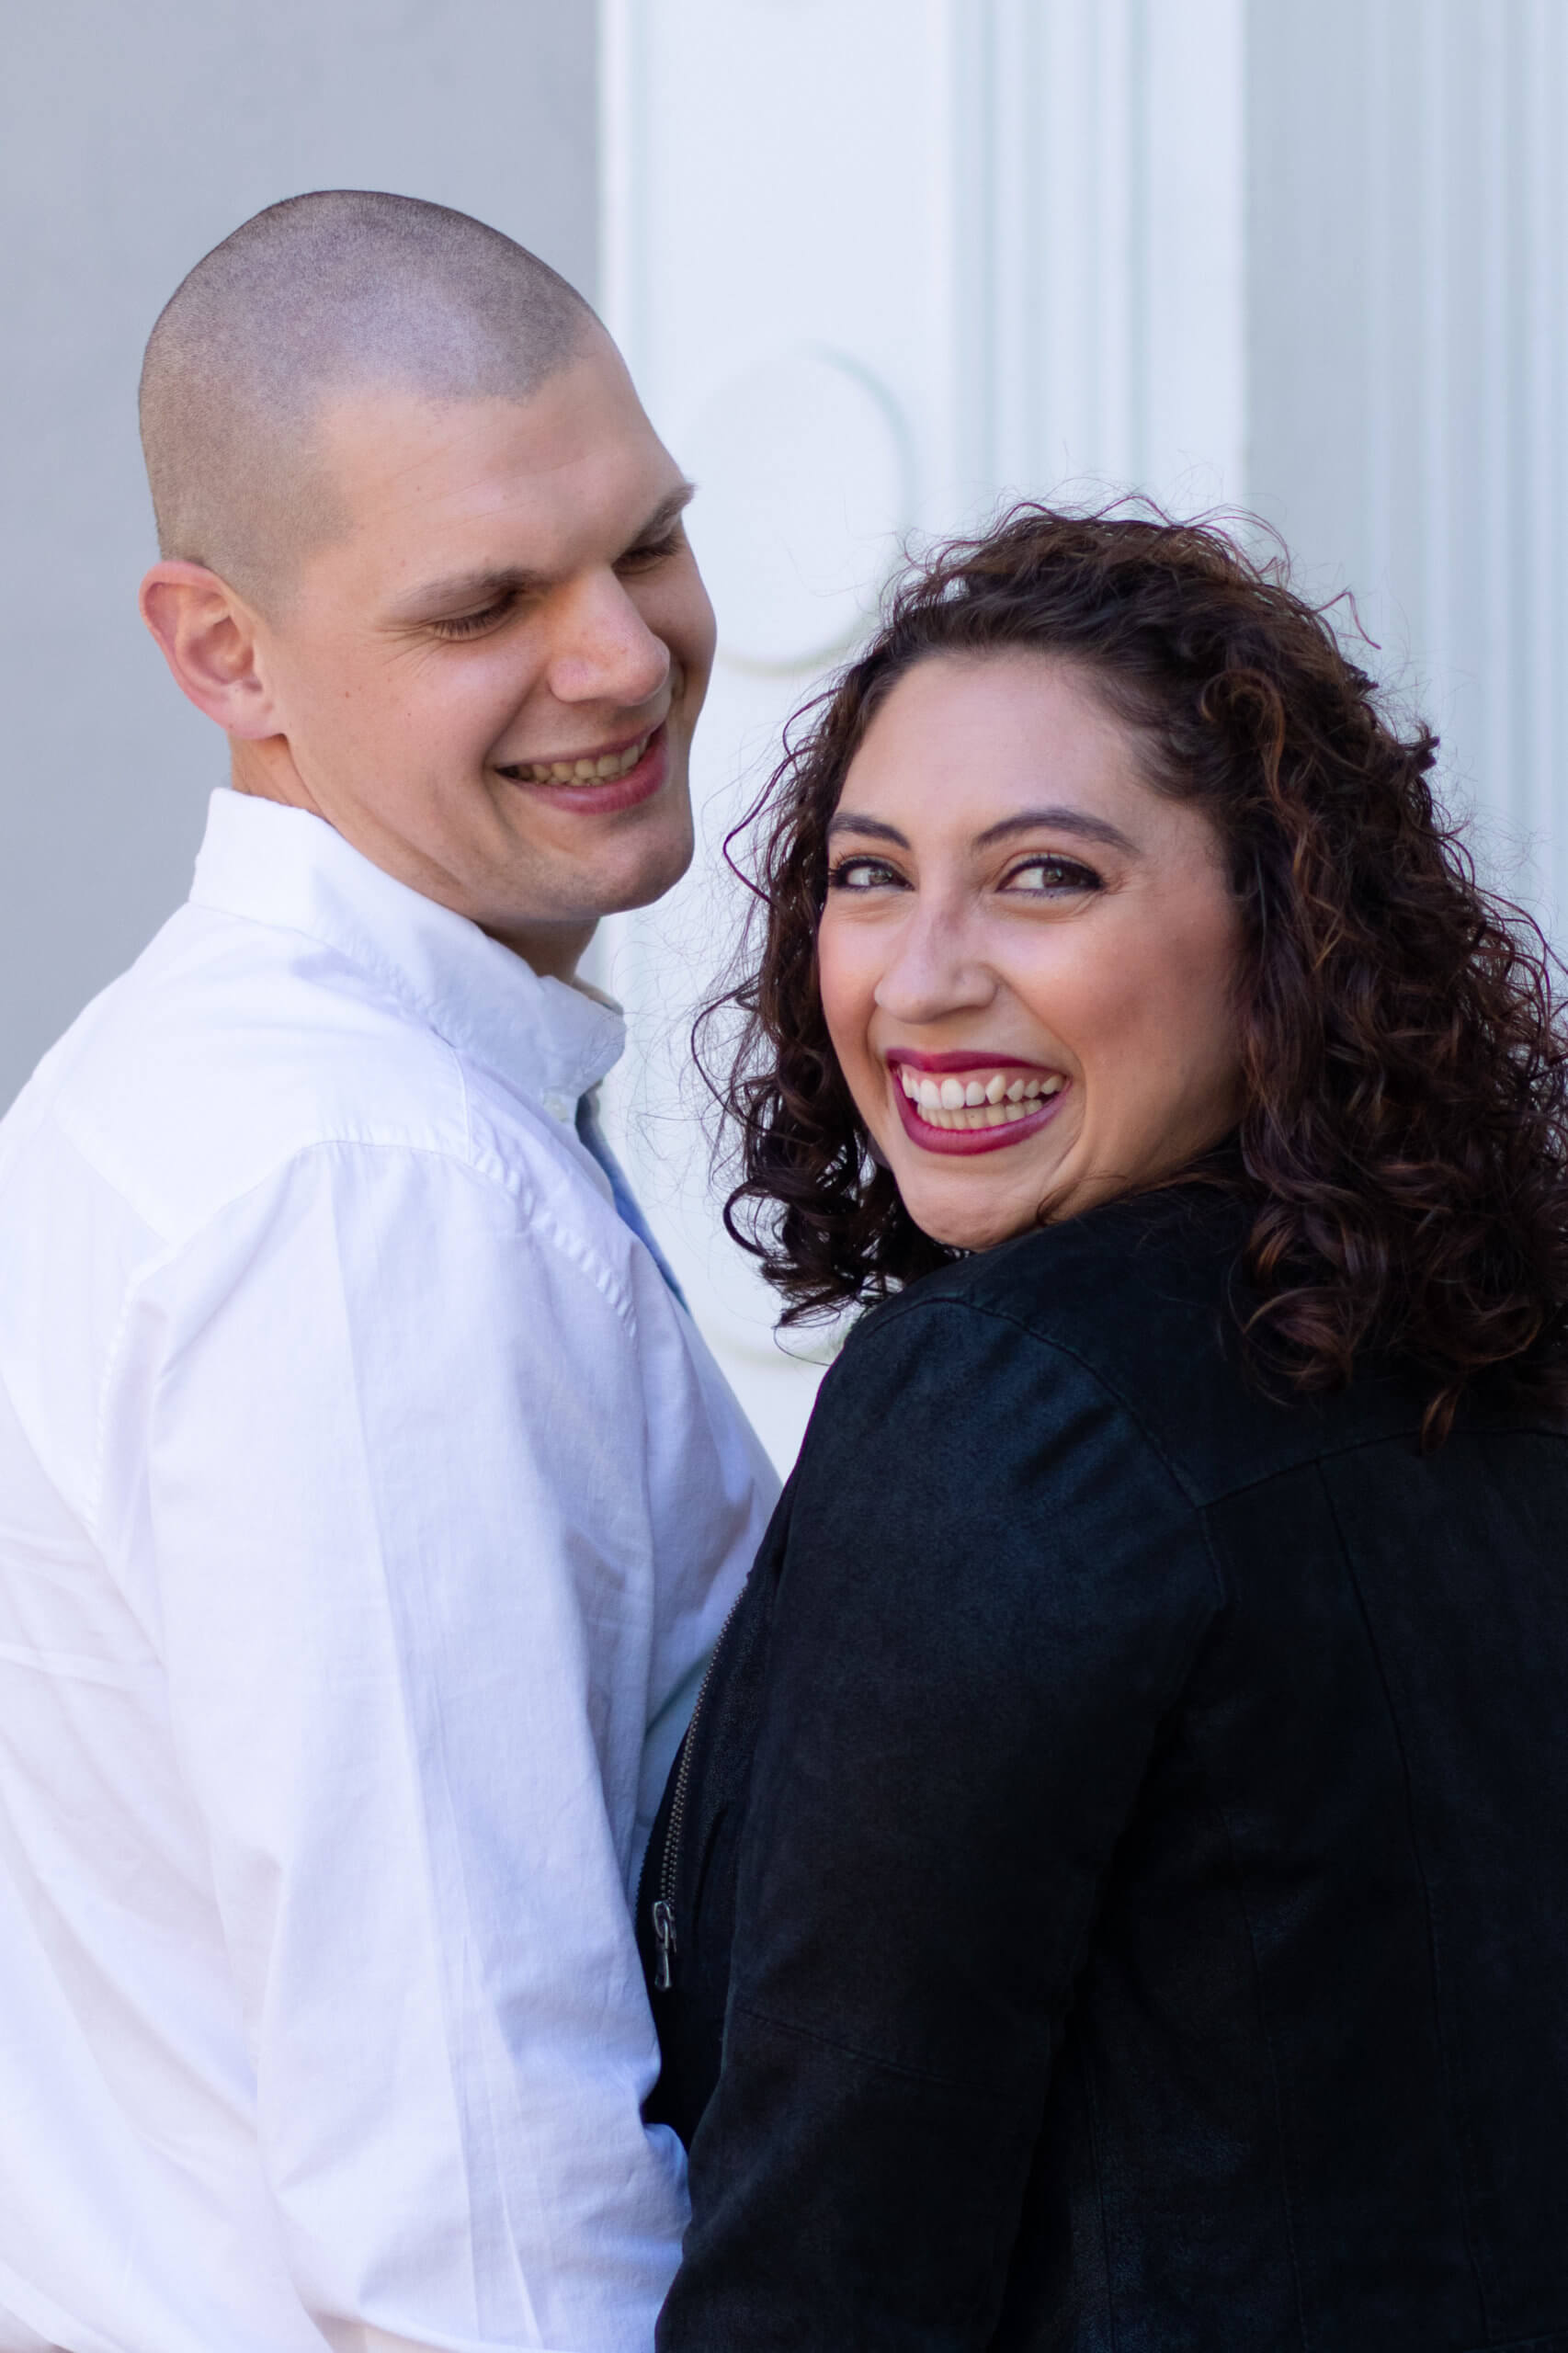 Engagement Session in Haddonfield, NJ 1